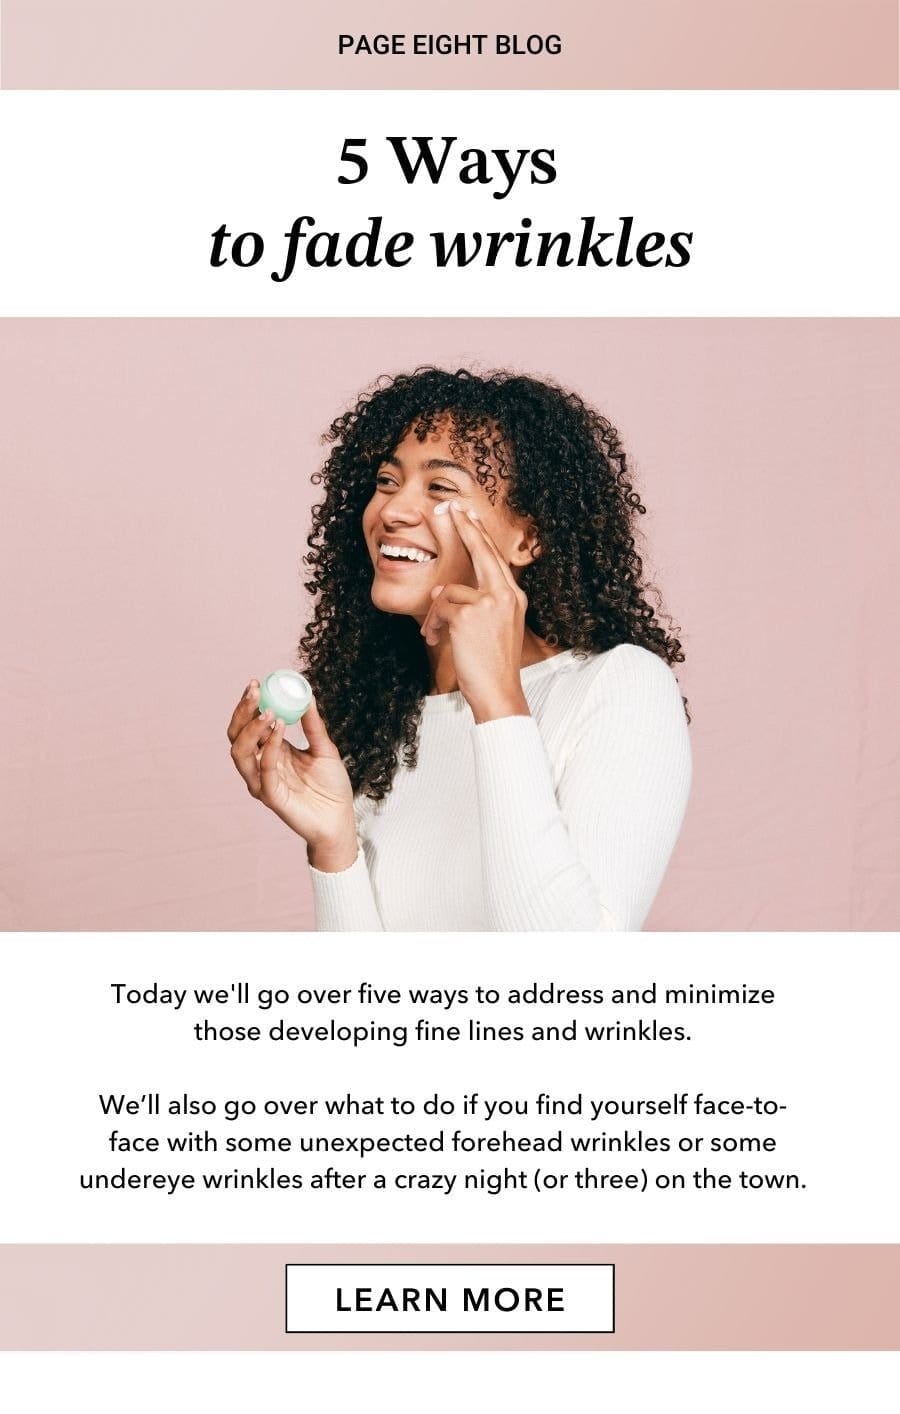 5 ways to fade wrinkles